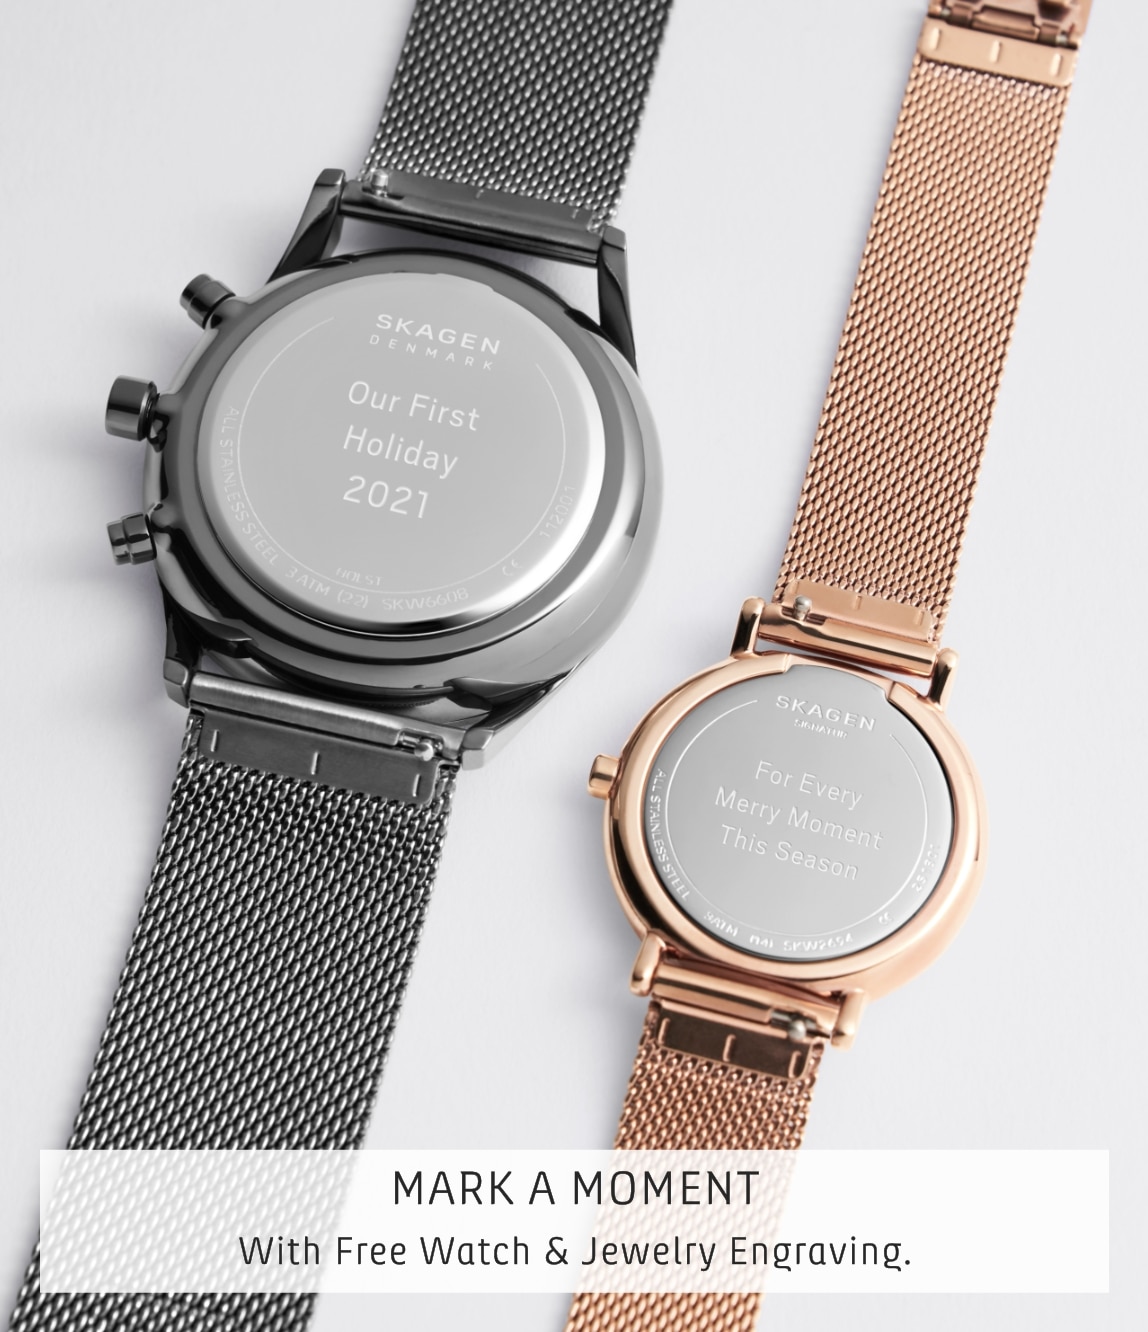 MARK A MOMENT With free watch & jewelry engraving.